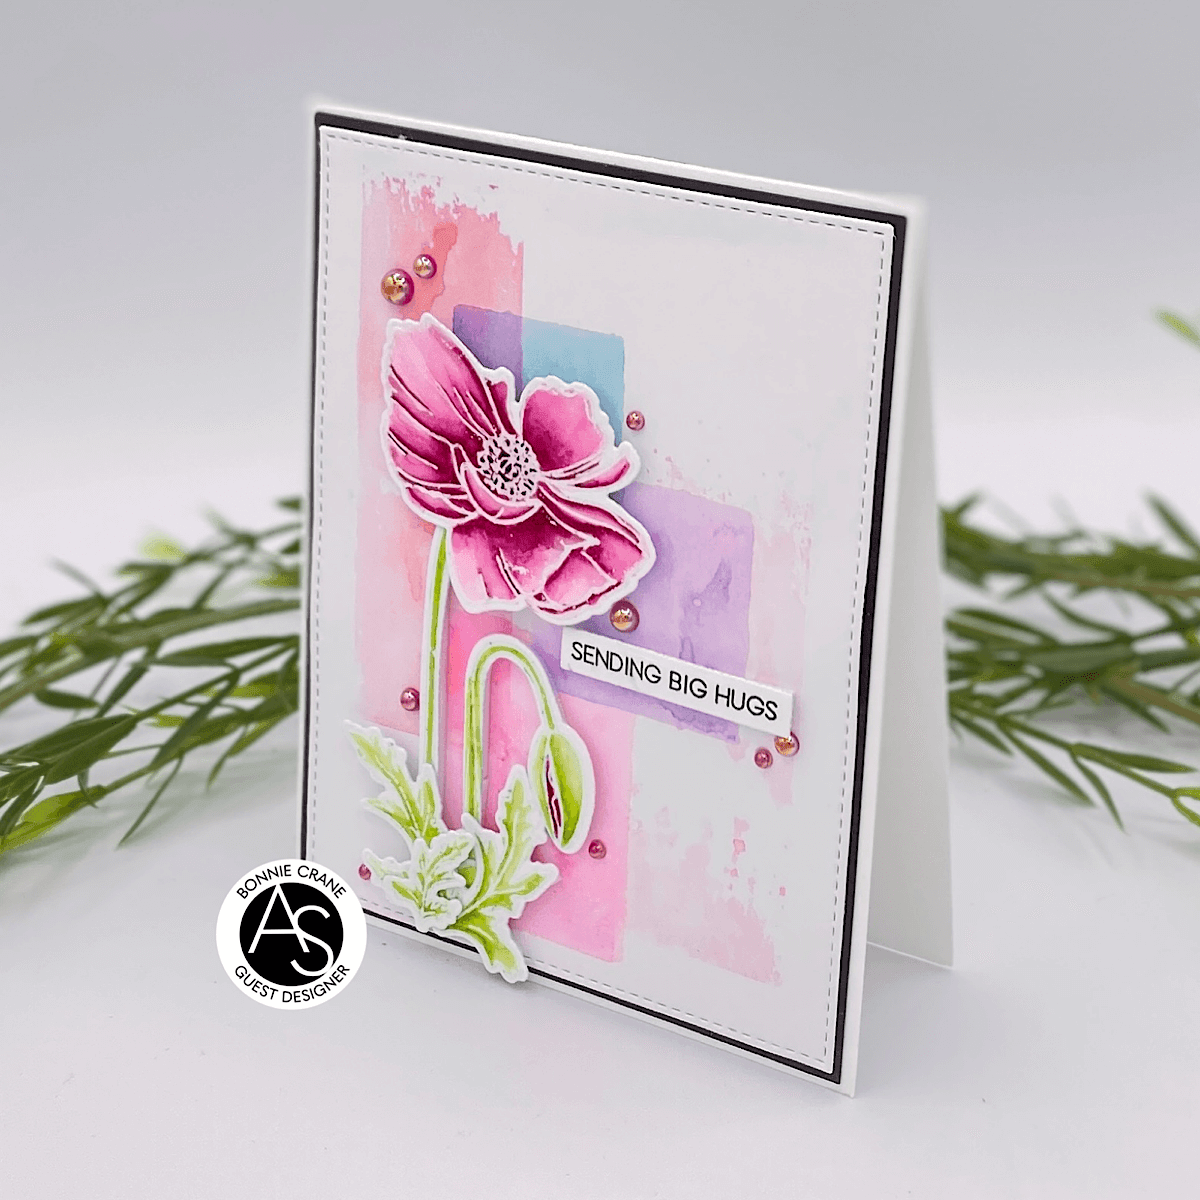 Cindy-Poppies-Stamp-alex-syberia-designs-flowers-cardmaking-coloring-dies-stencils-cascards-hugs-scrapbooking